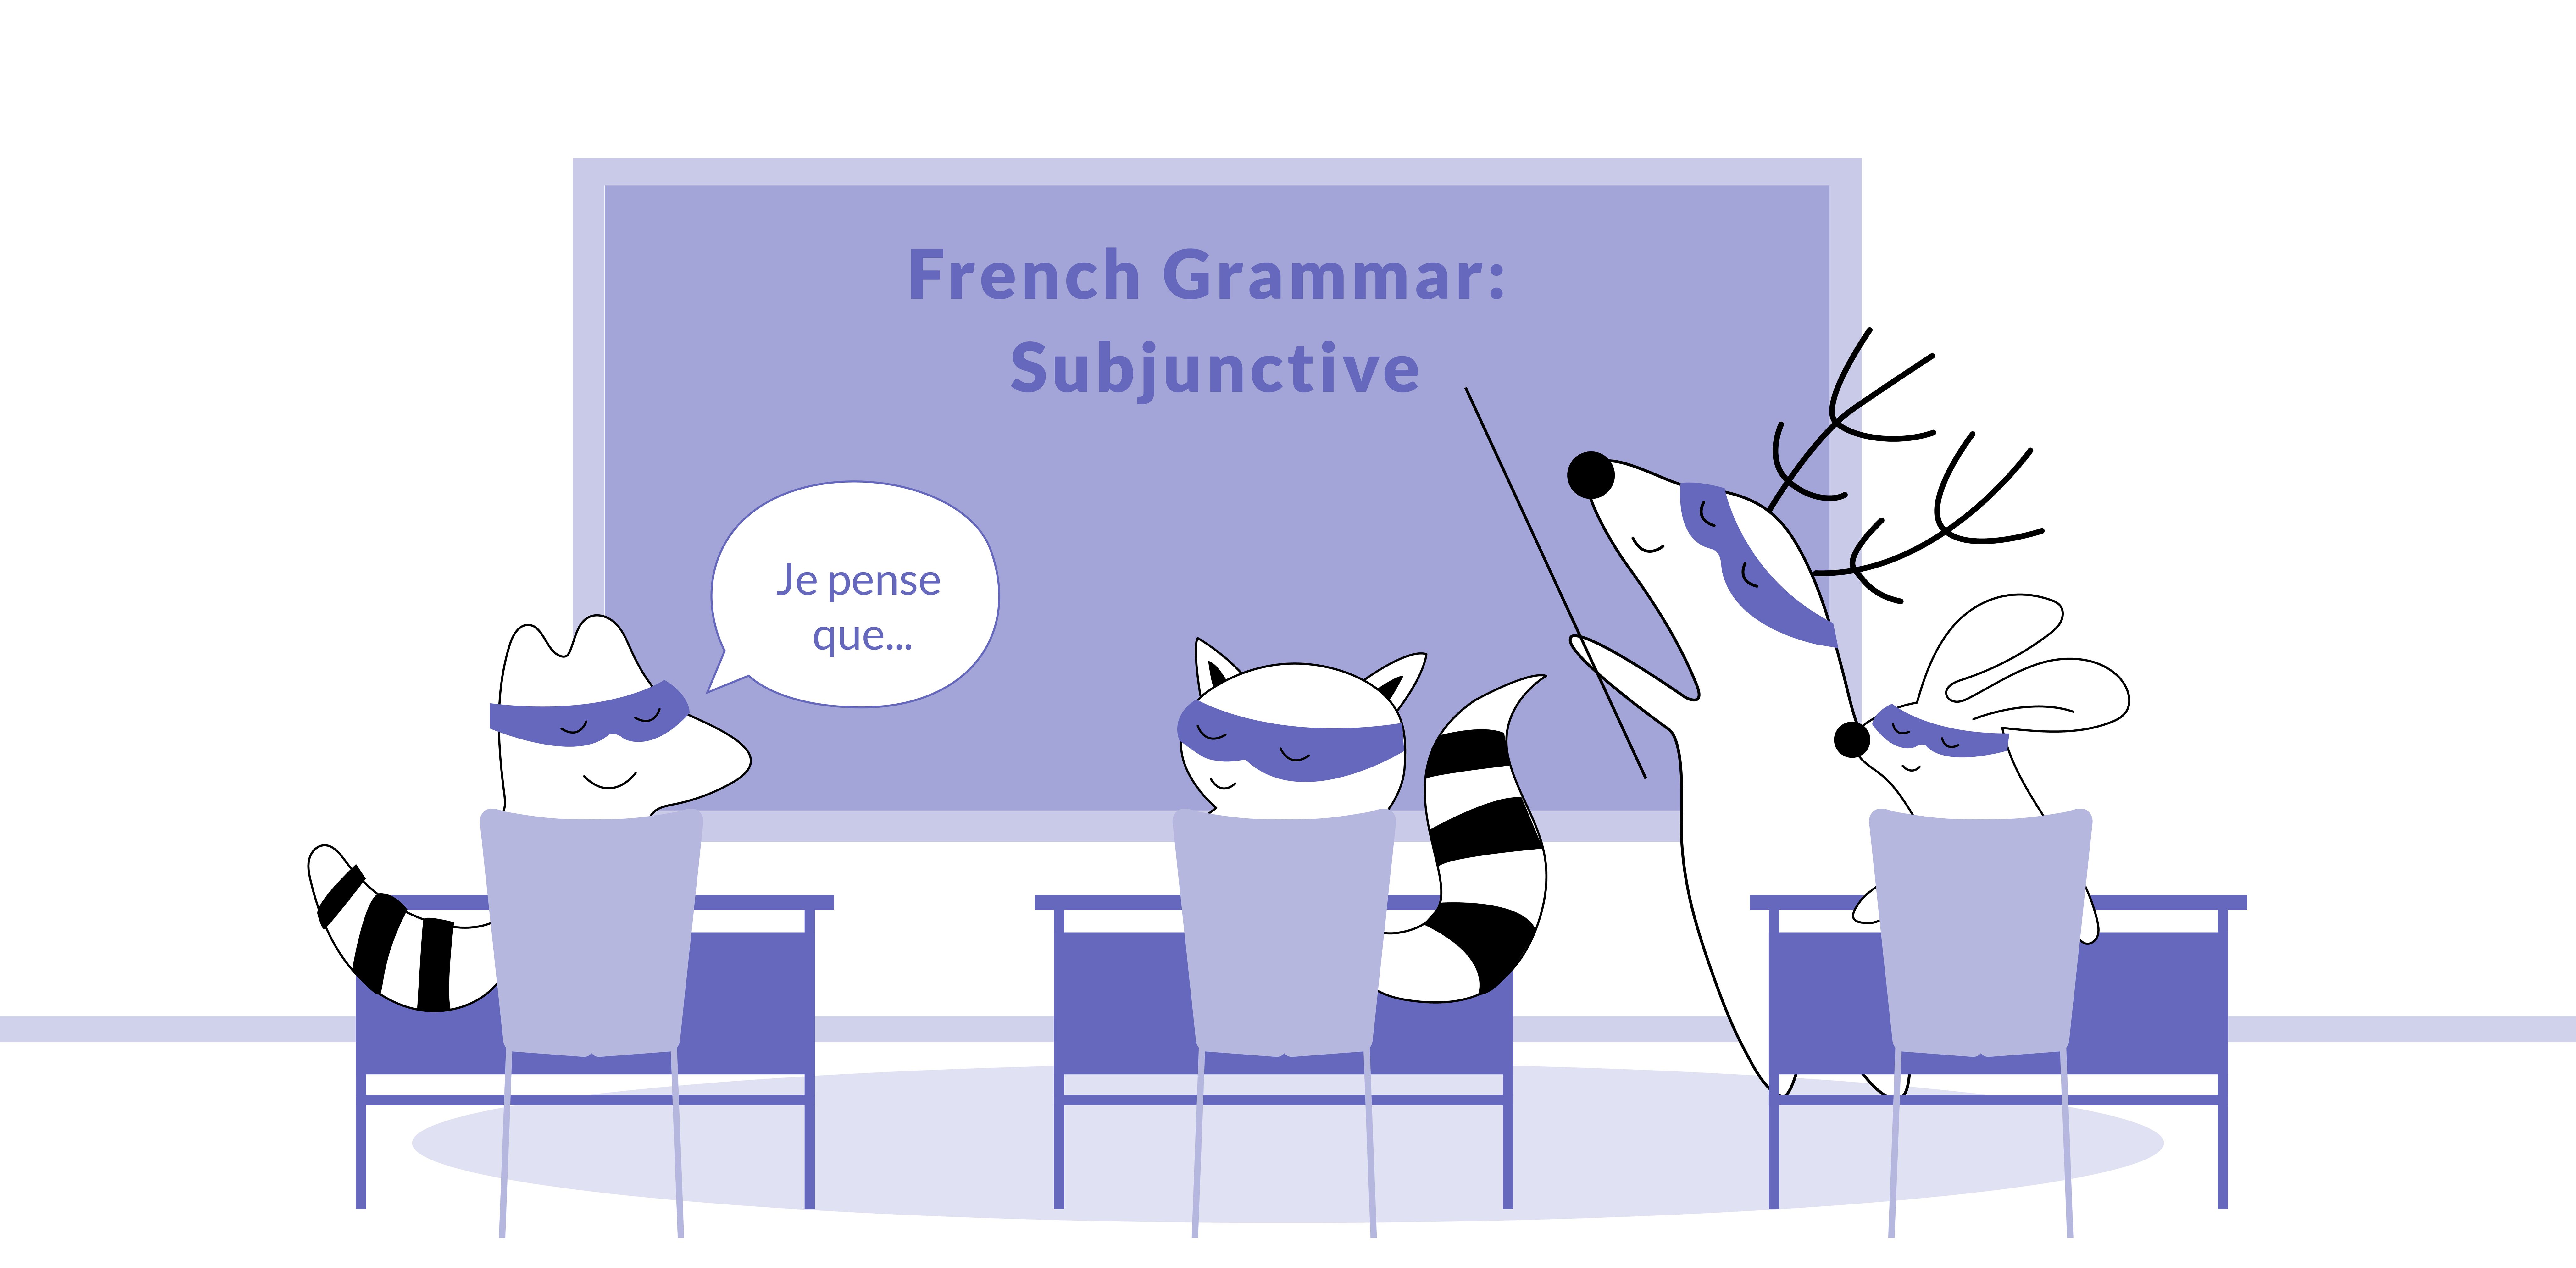 Iggy and other characters in a classroom. Iggy with his hand raised saying “Je pense que…”